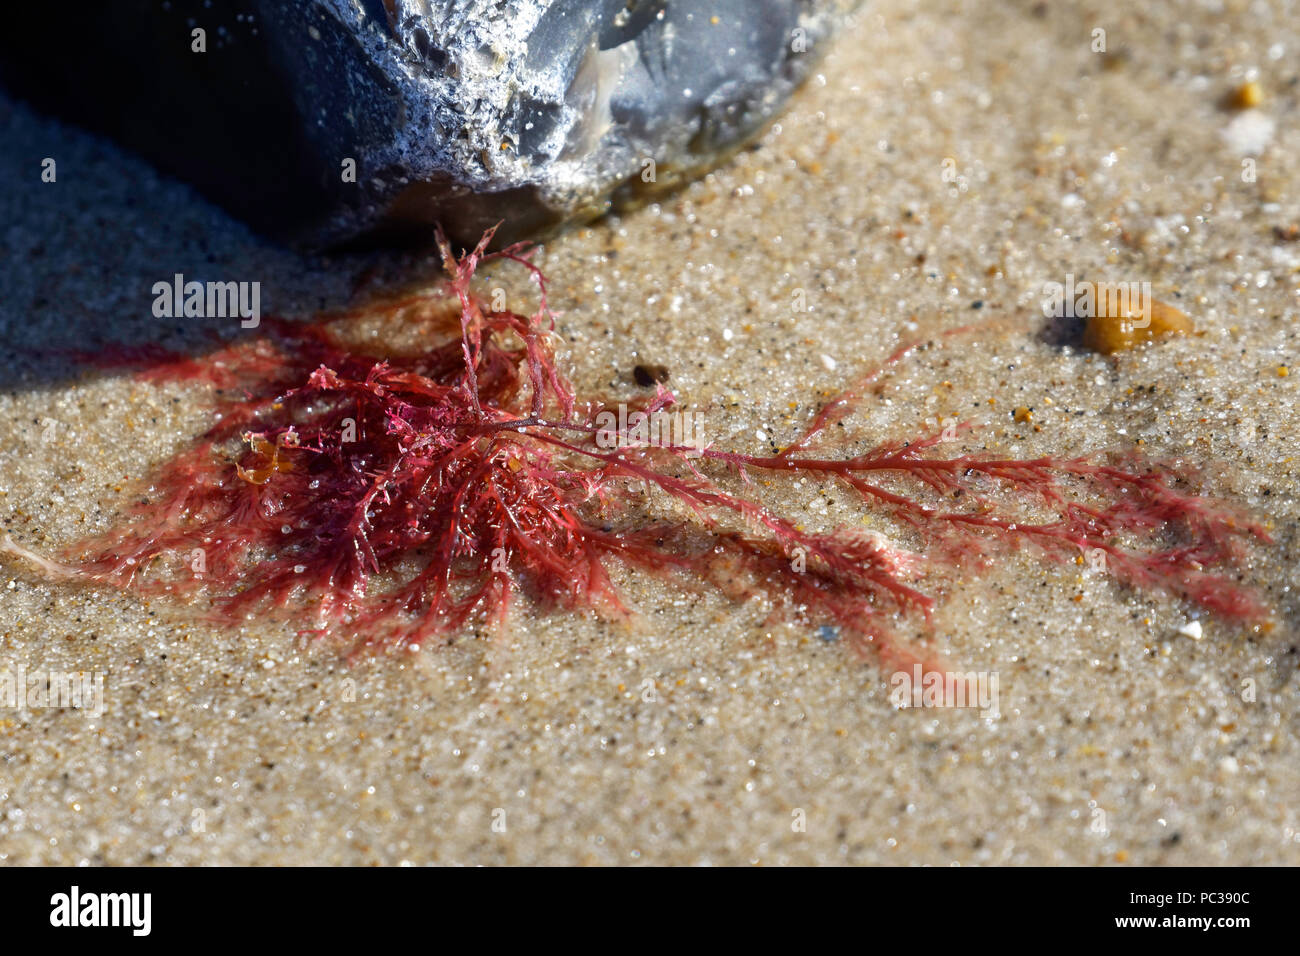 Red seaweed washed up on a sandy beach Stock Photo